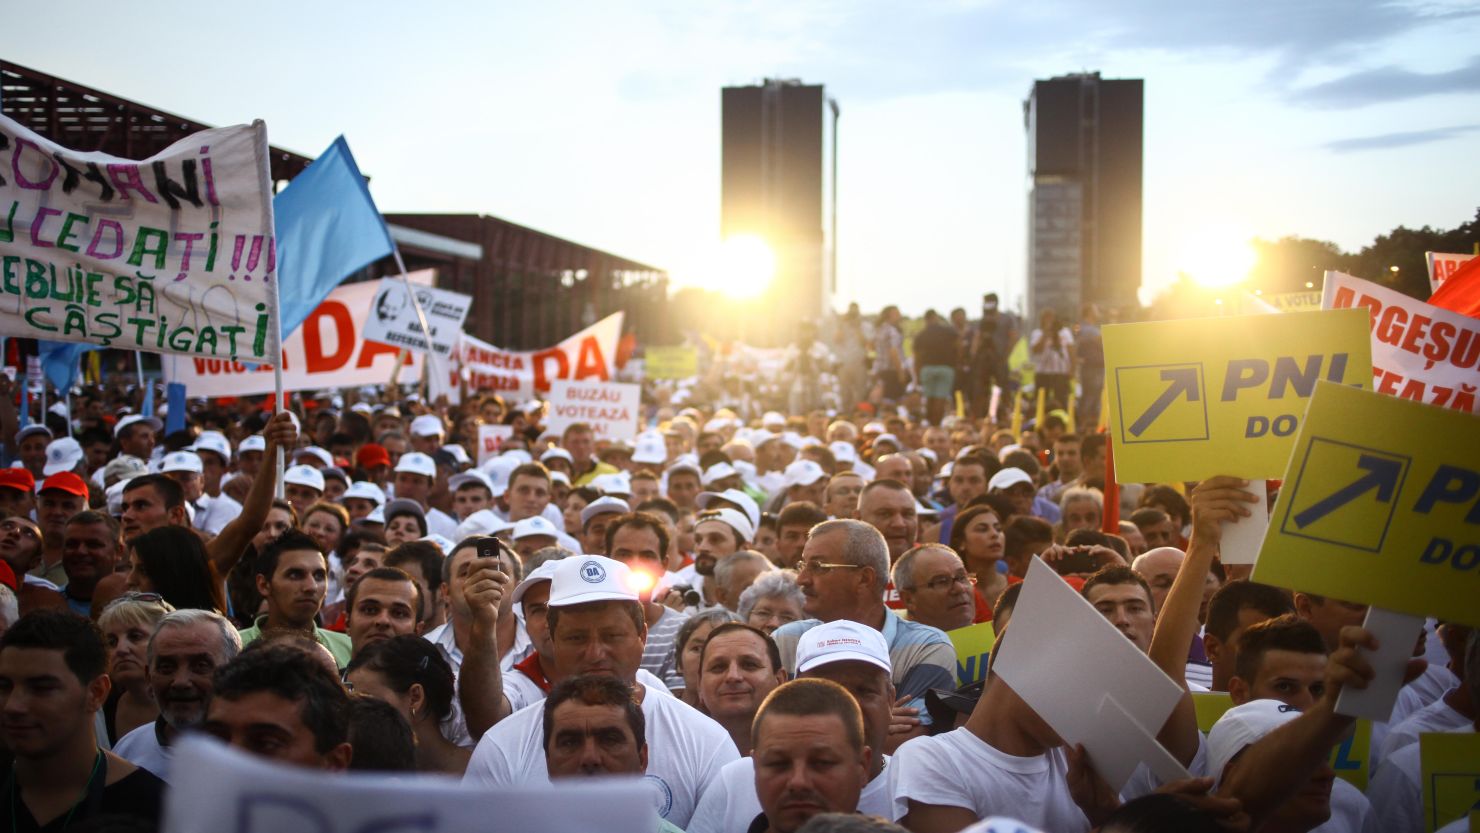 Supporters of Romanian PM Victor Ponta listen to him at a rally in Bucharest Thursday in favor of impeaching the president.